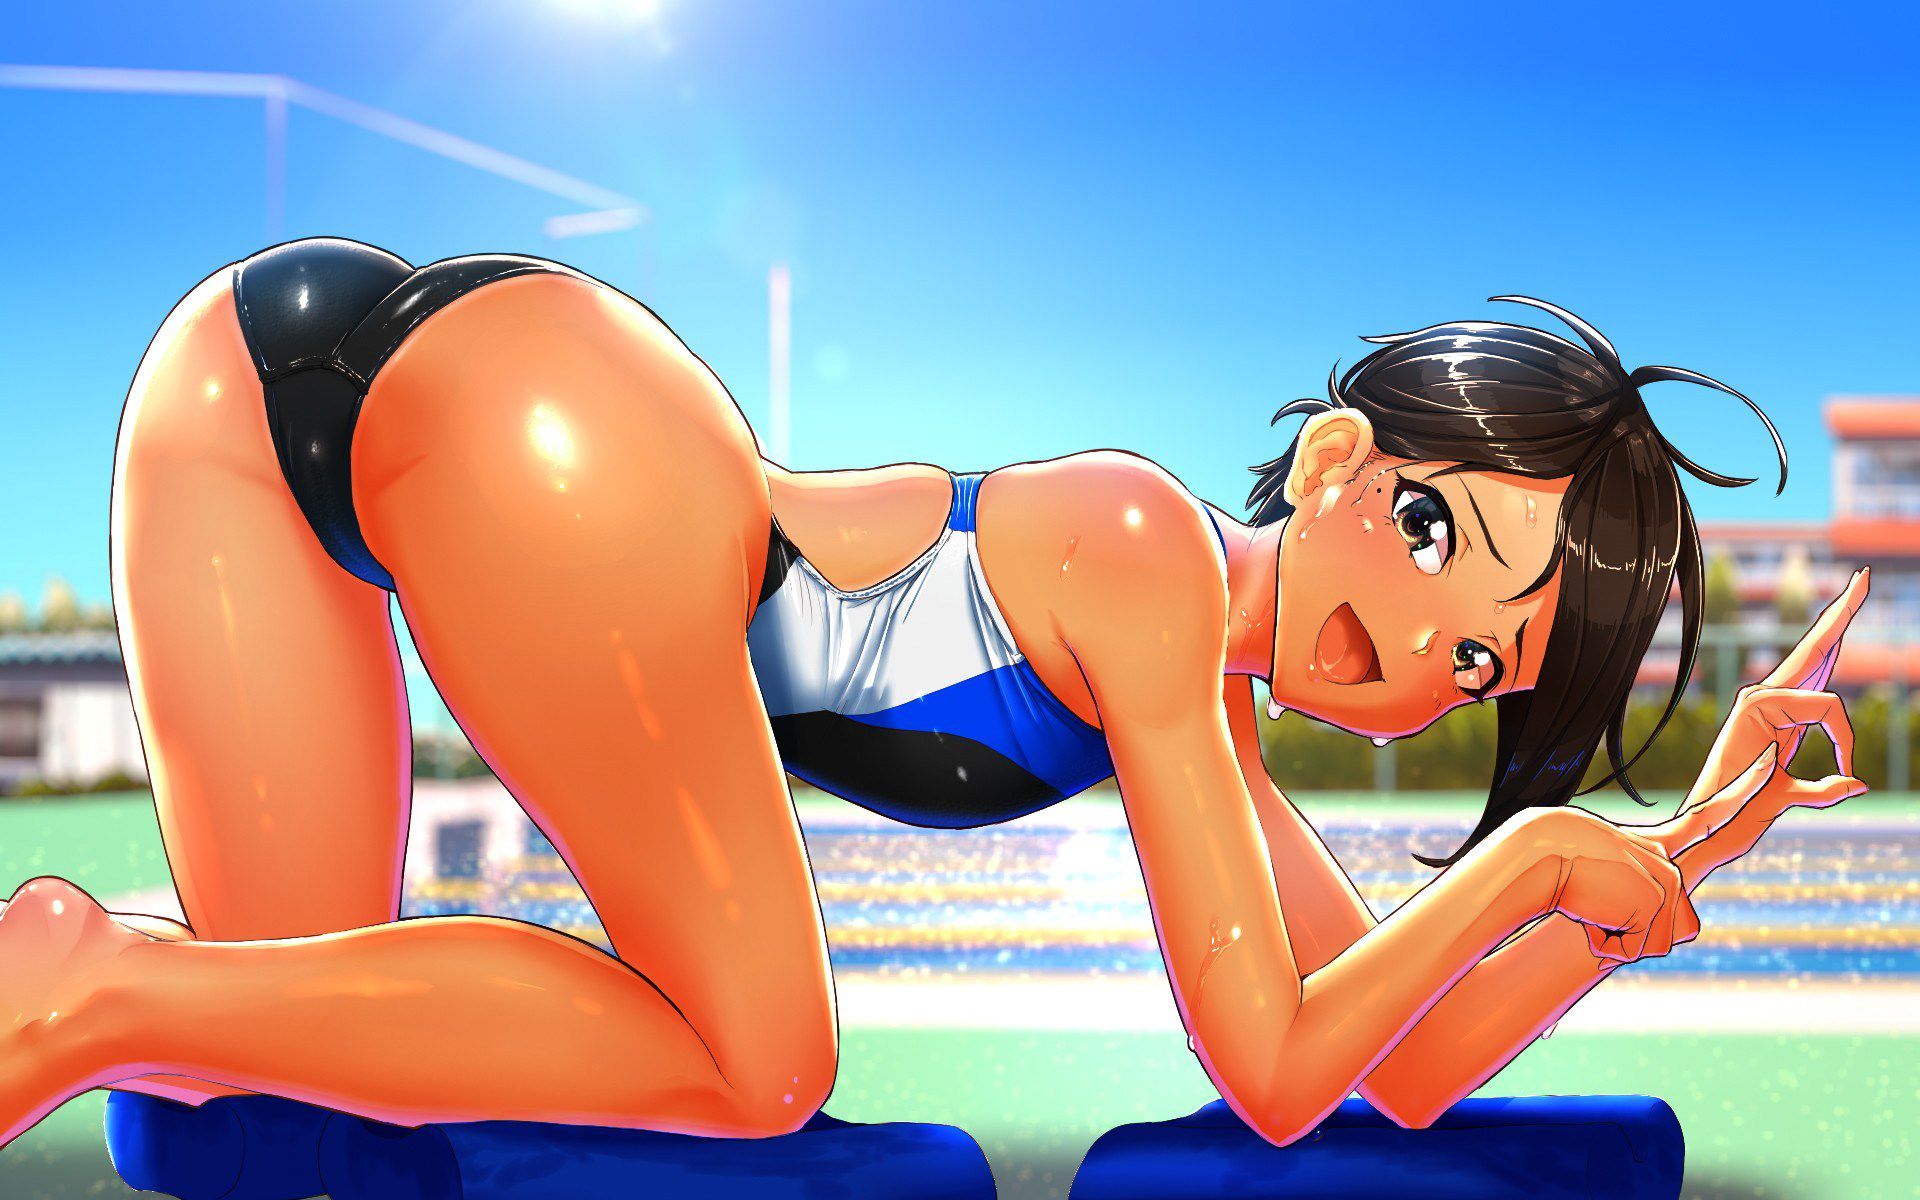 Isn't the new use of swimming swimsuits not underwater, but athletics? Two-dimensional erotic image of a sexy girl in a swimsuit that makes you think 30